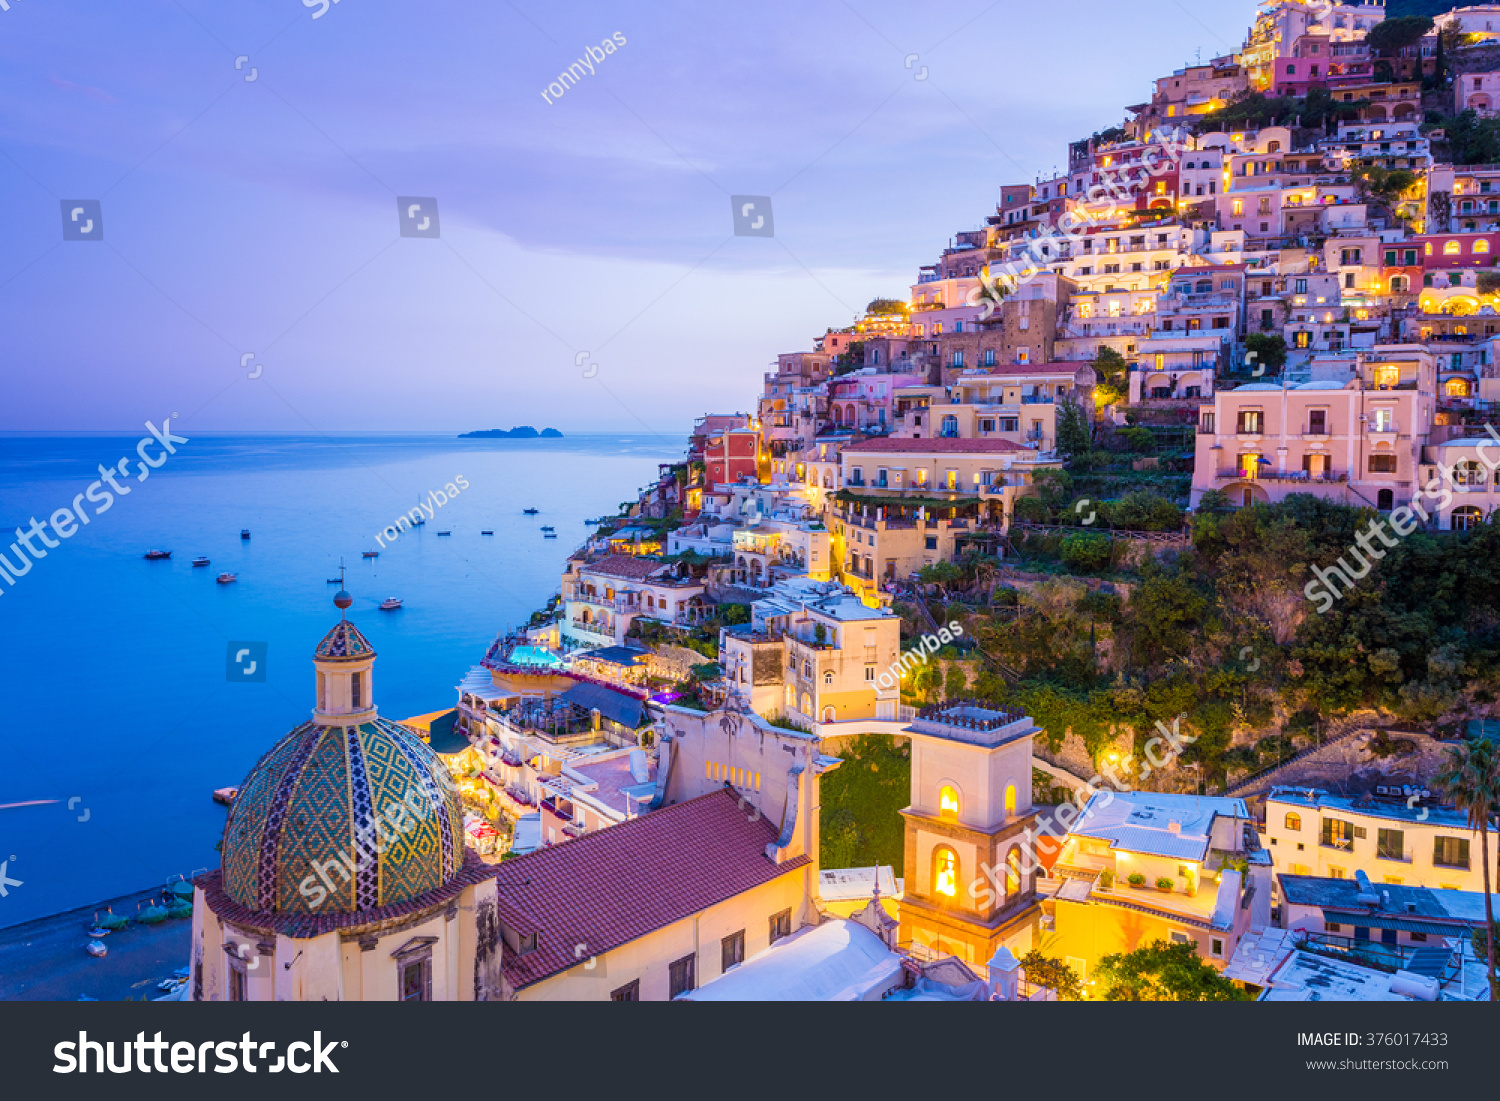 Positano, Amalfi Coast, Campania, Sorrento, Italy. View of the town and the seaside in a summer sunset #376017433